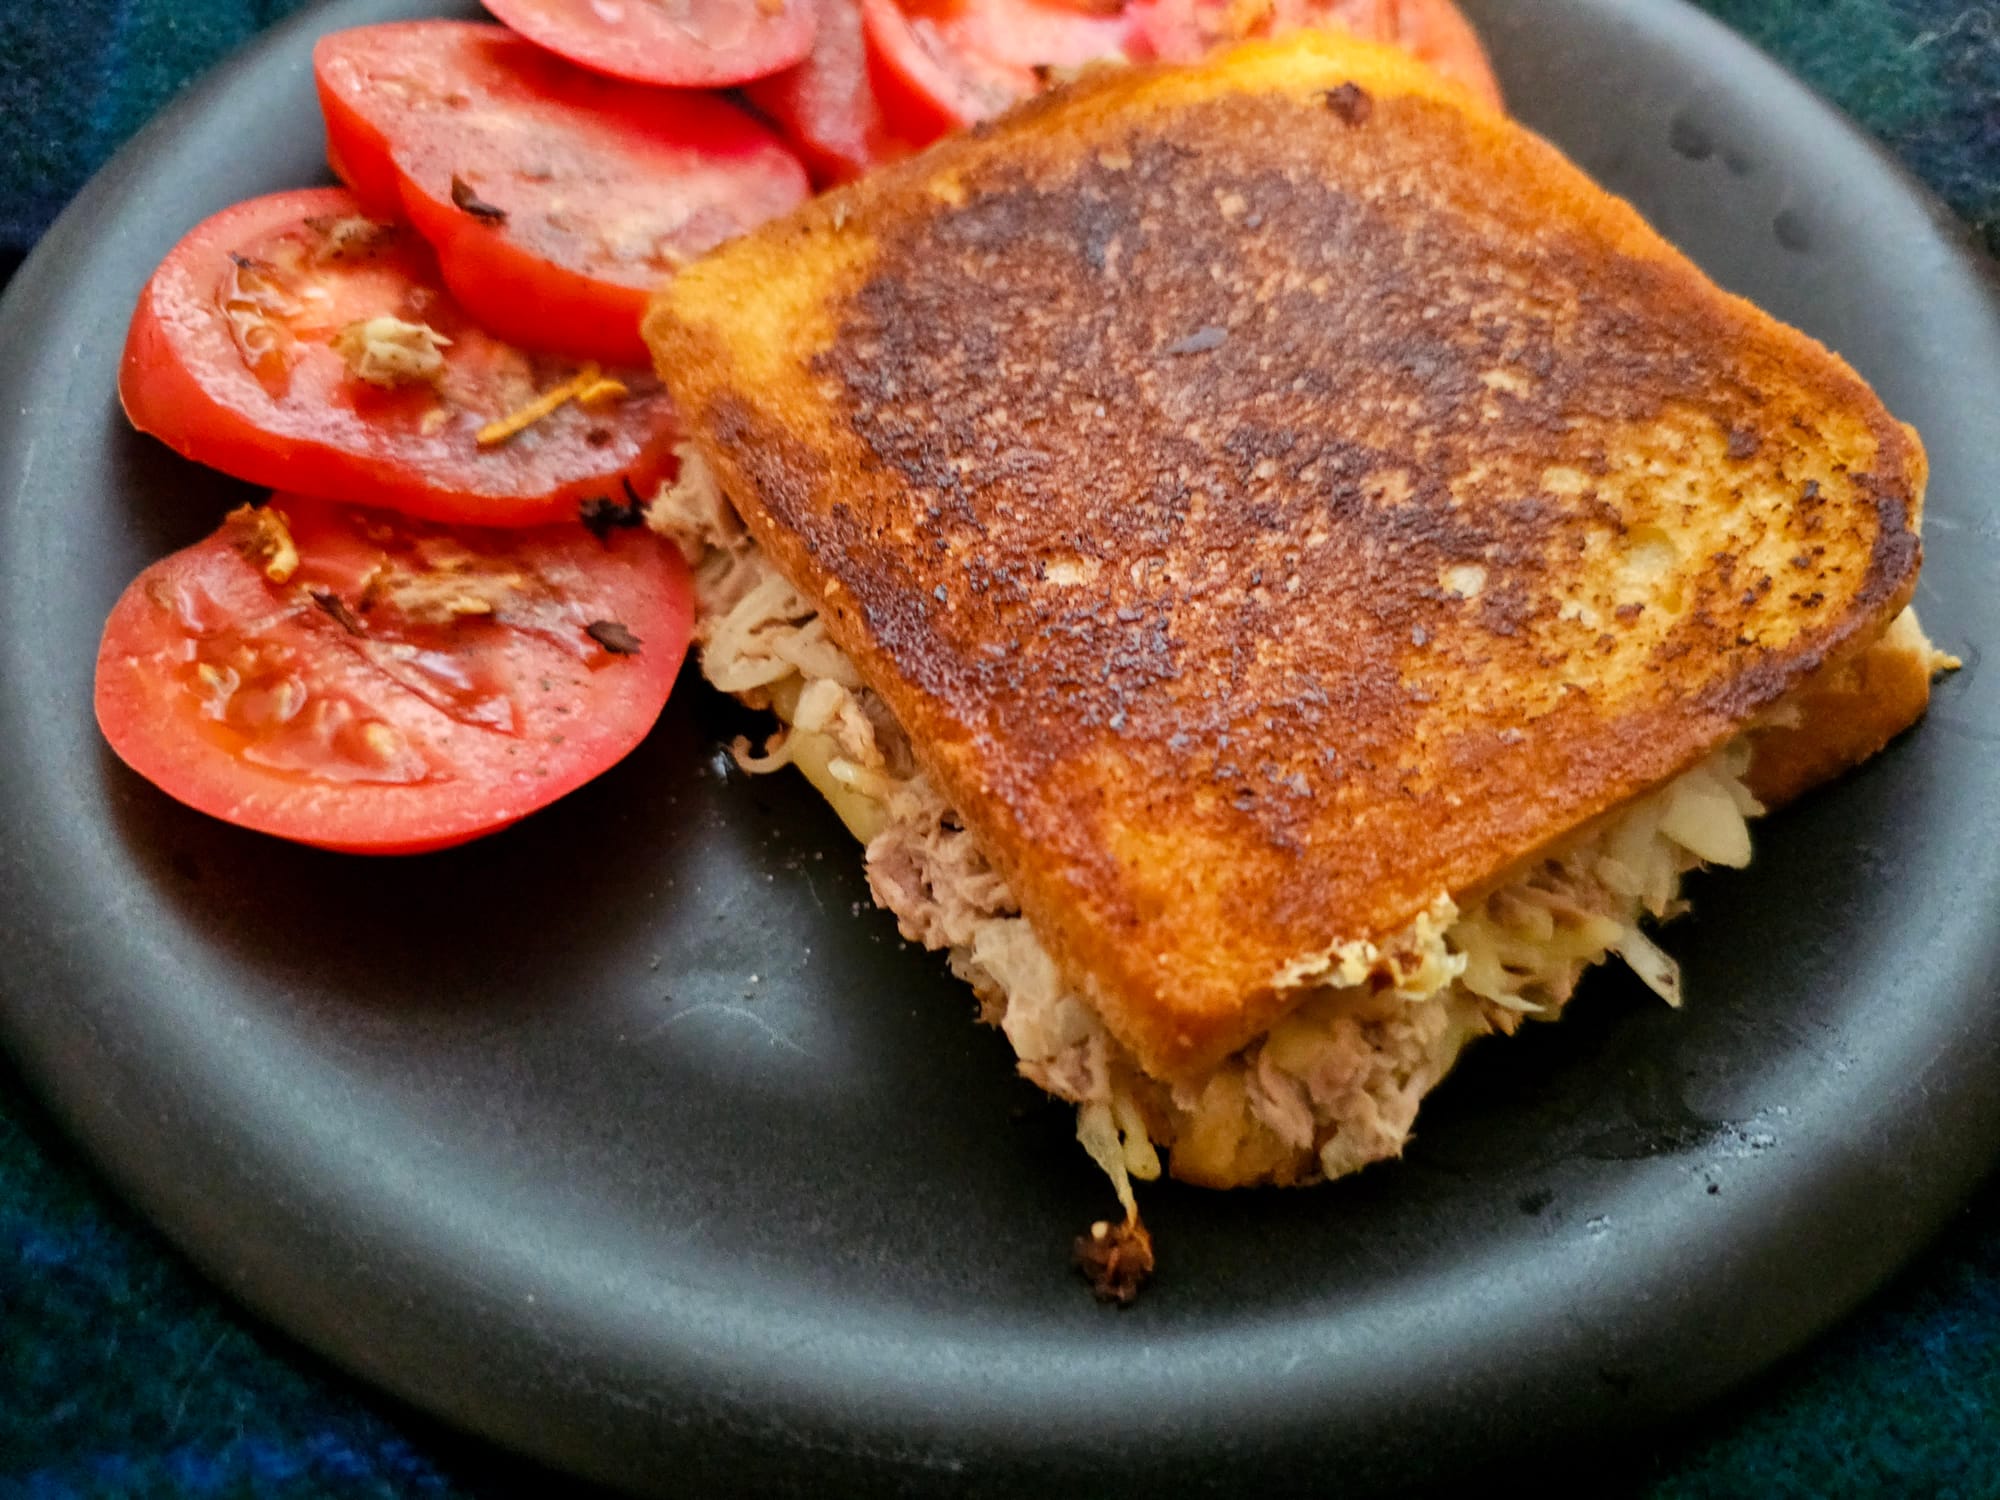 A tuna melt on a black plate with a cut up tomato as garnish